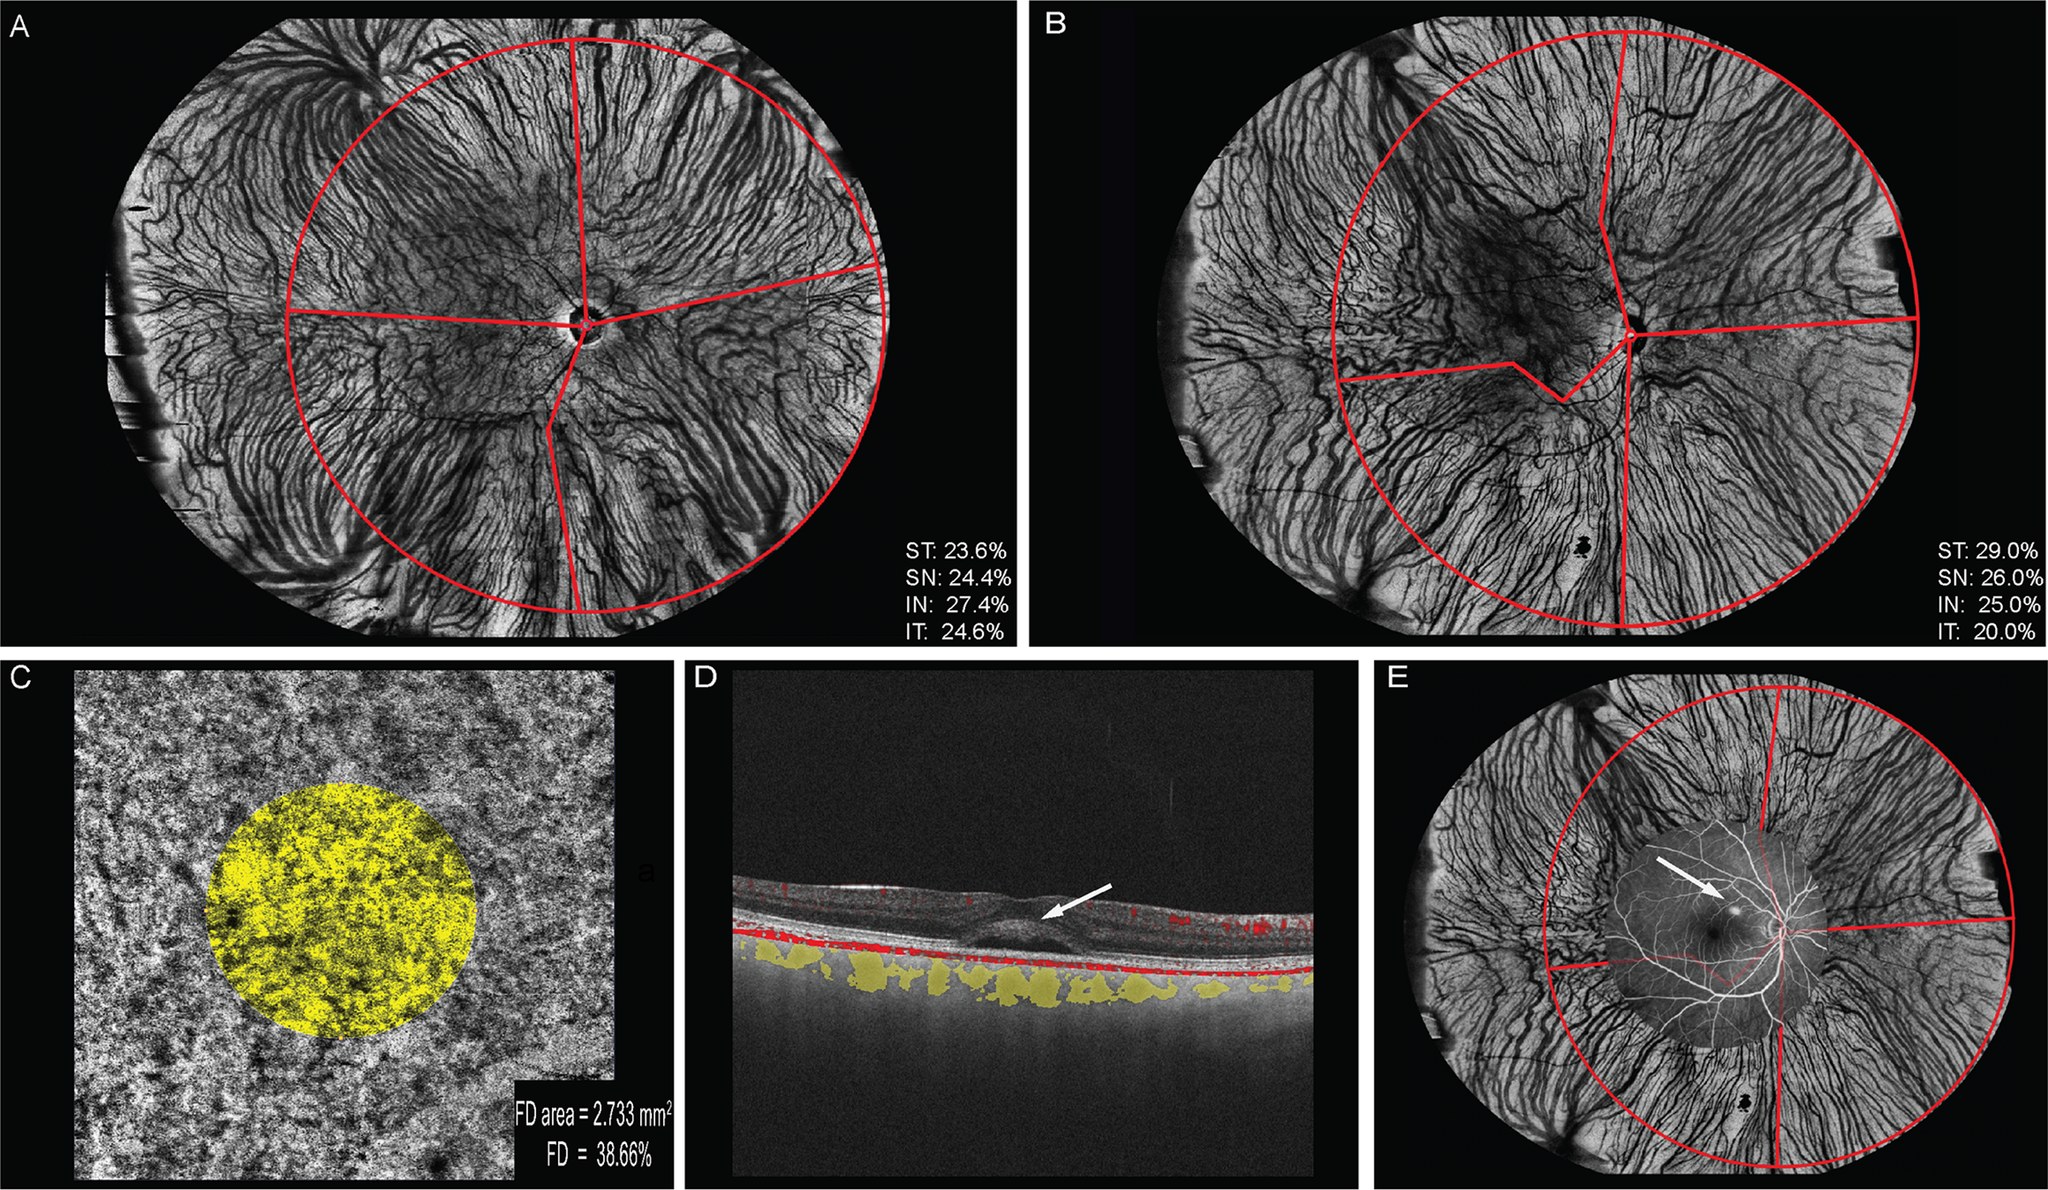  Fig1.  A-B showed the different VV% between healthy eye and CSC eye. The macular leakage rate was significantly higher in the ST quadrant after colocating the leakage points in FA with the En Face OCT as shown in figure E. 